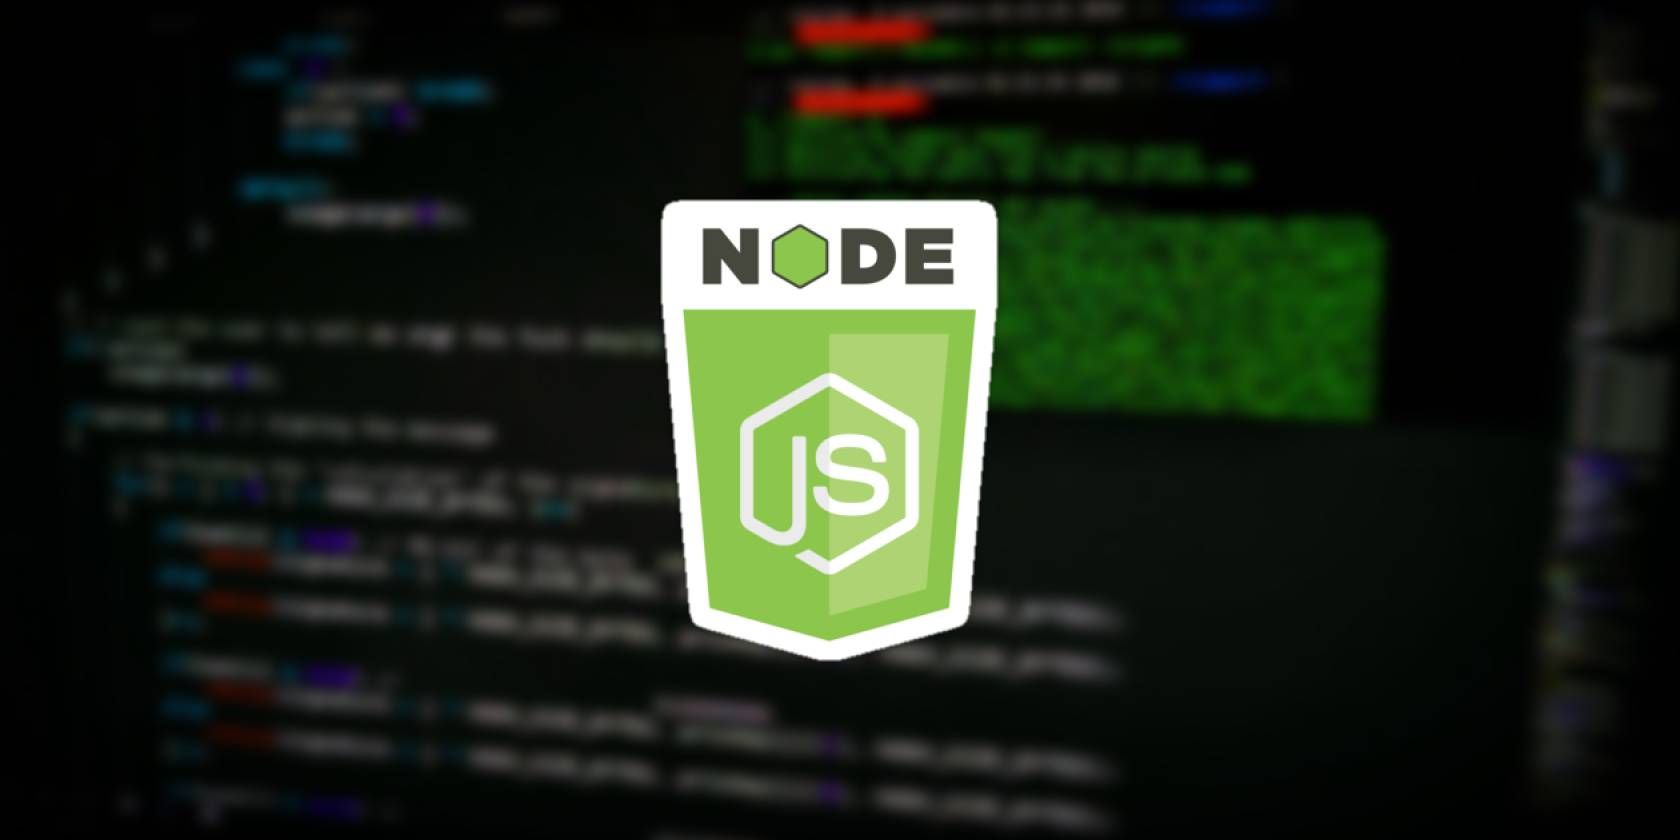 Image of Node.js logo on a blurred background displaying a computer screen with lines of code and a running terminal window